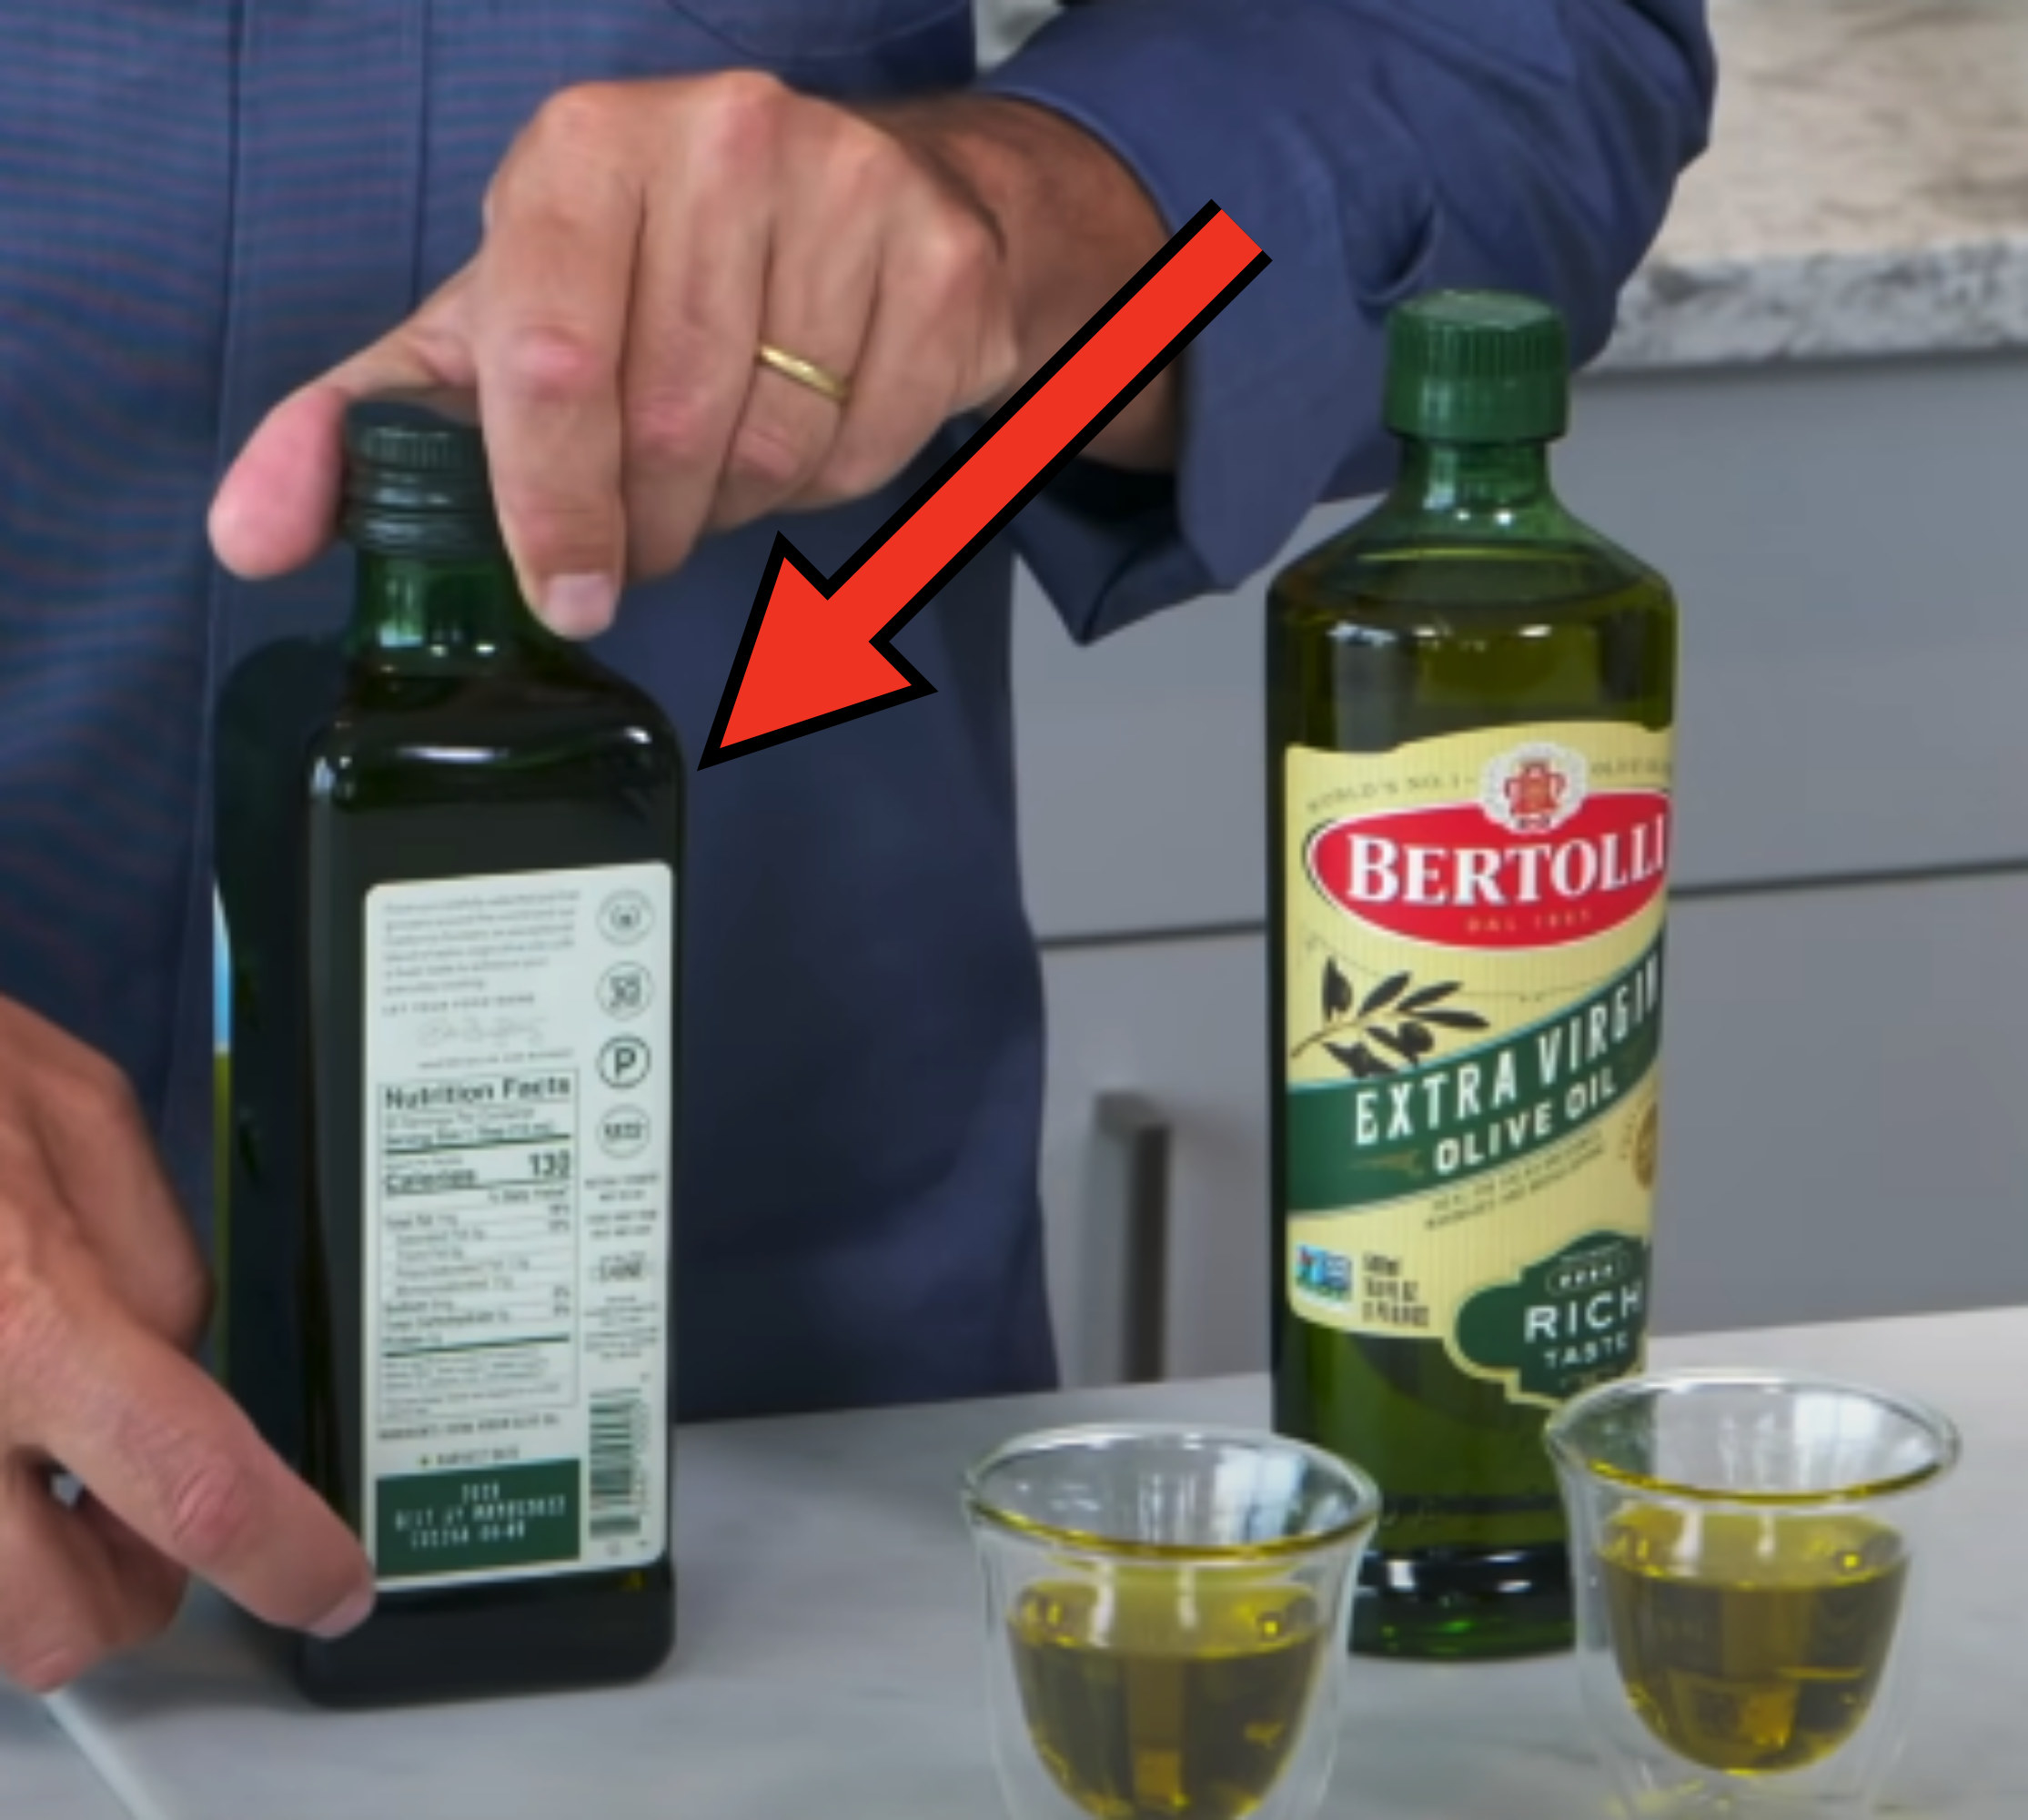 comparing two types of olive oil with arrow pointing to expensive one